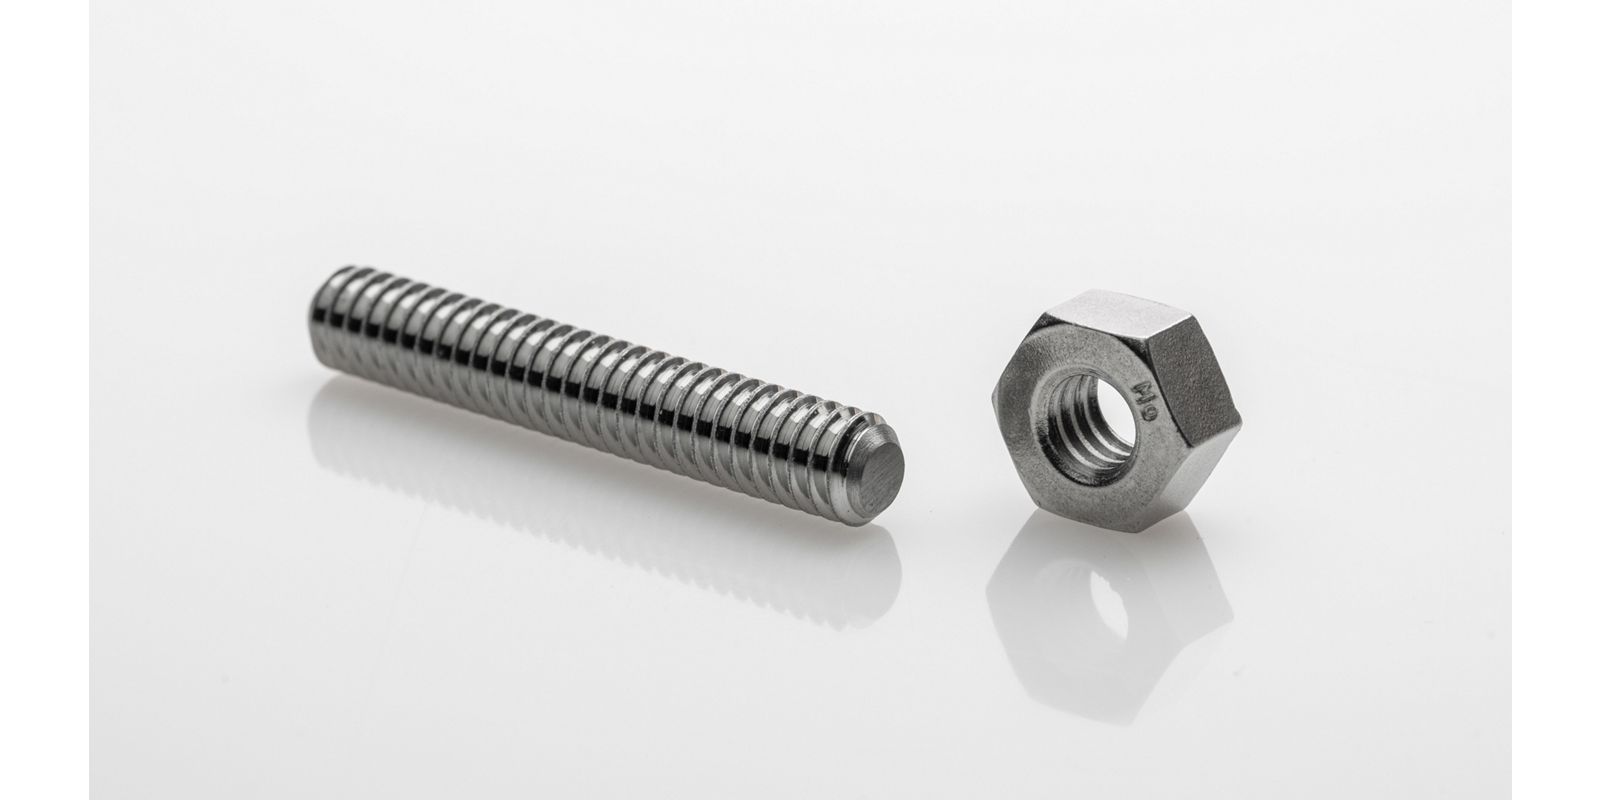 Screws, rivets, and nuts